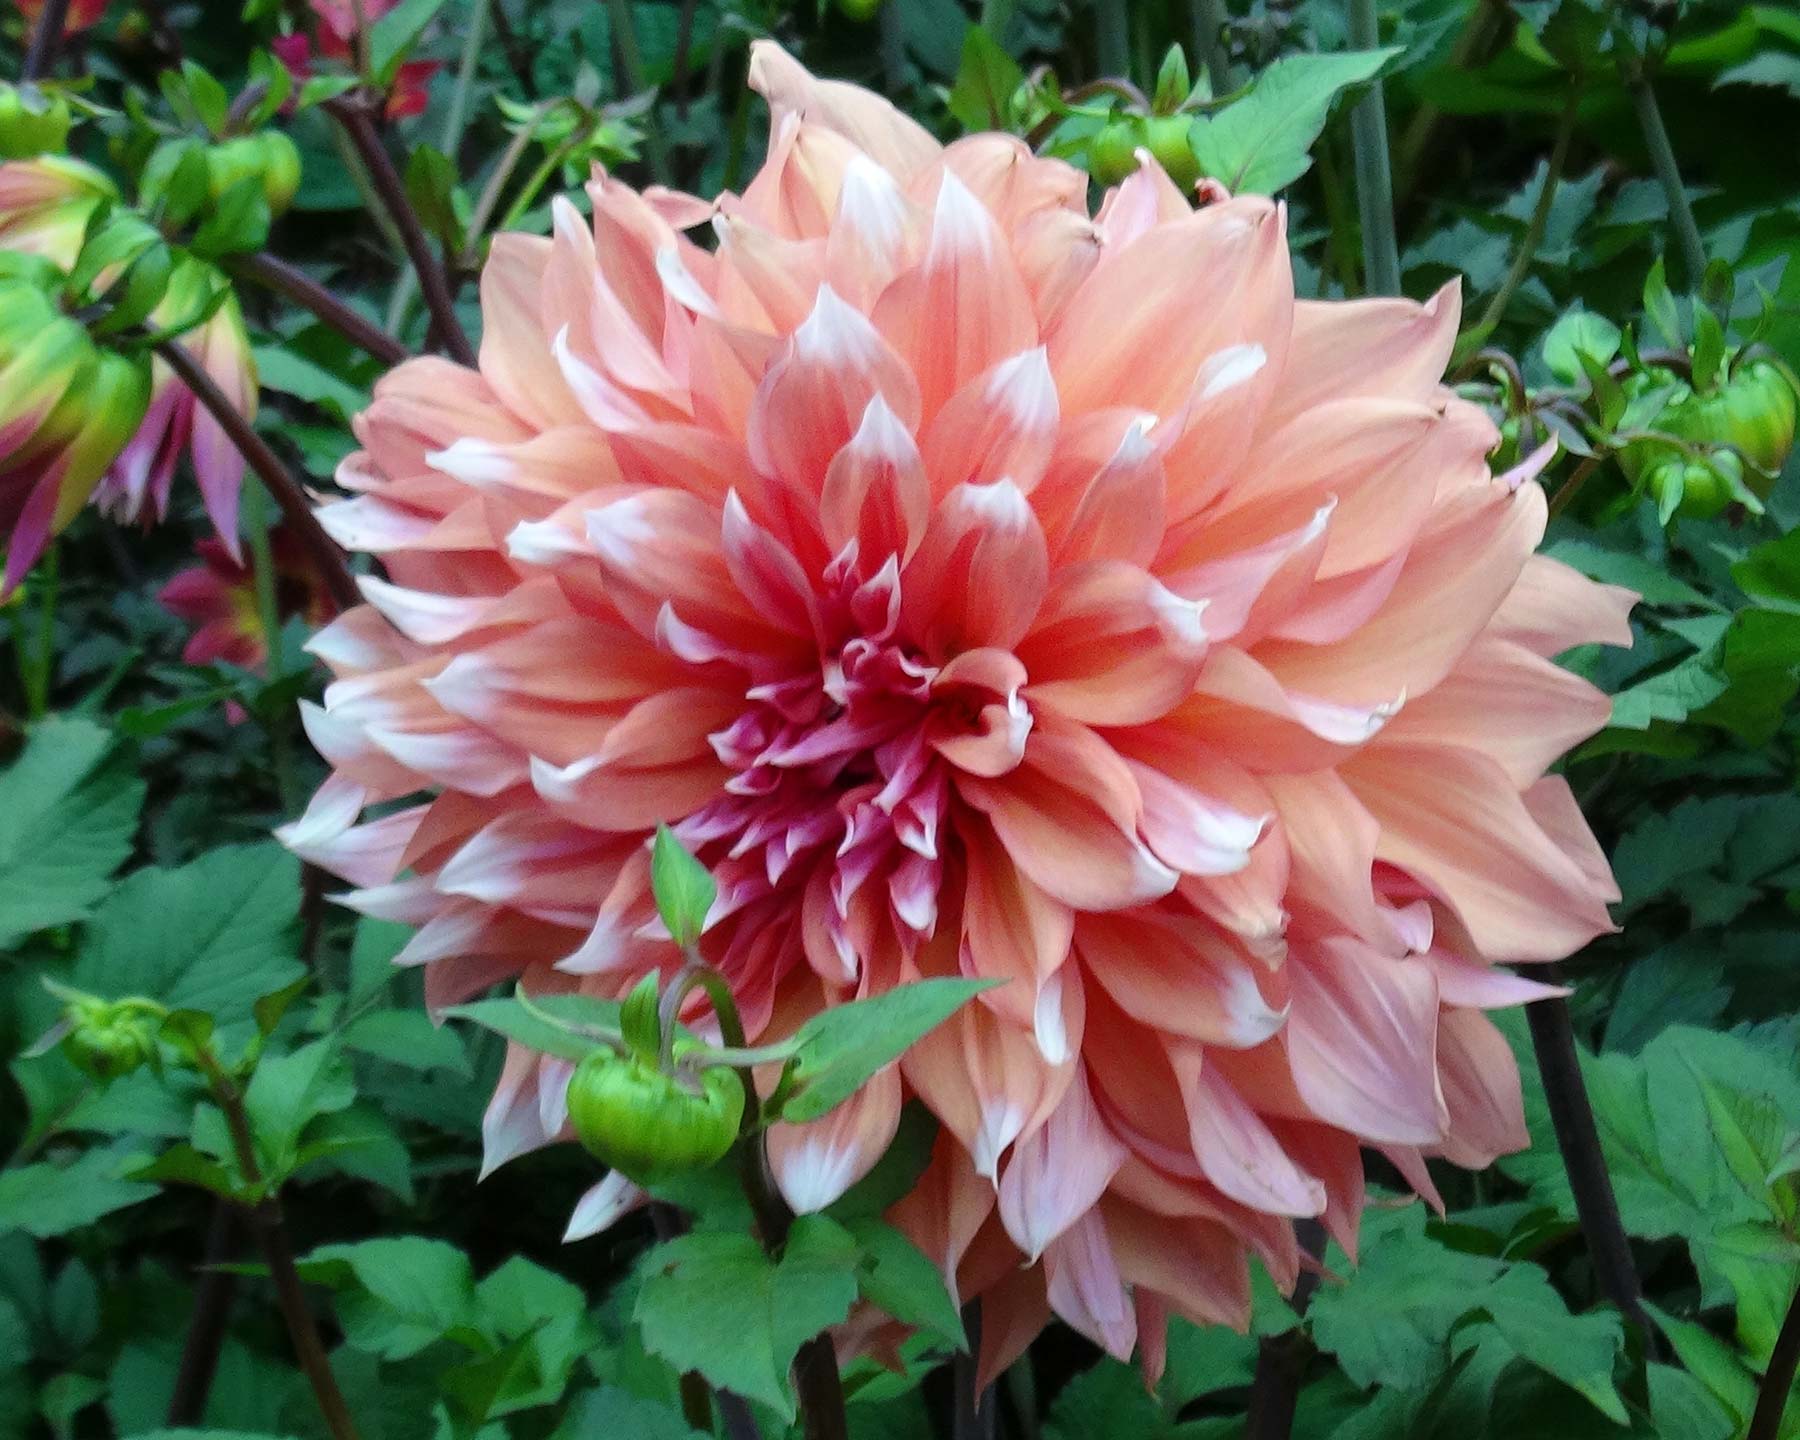 Dahlia Decorative Group 'Holland Festival' - this is a giant hybrid with 250mm heads